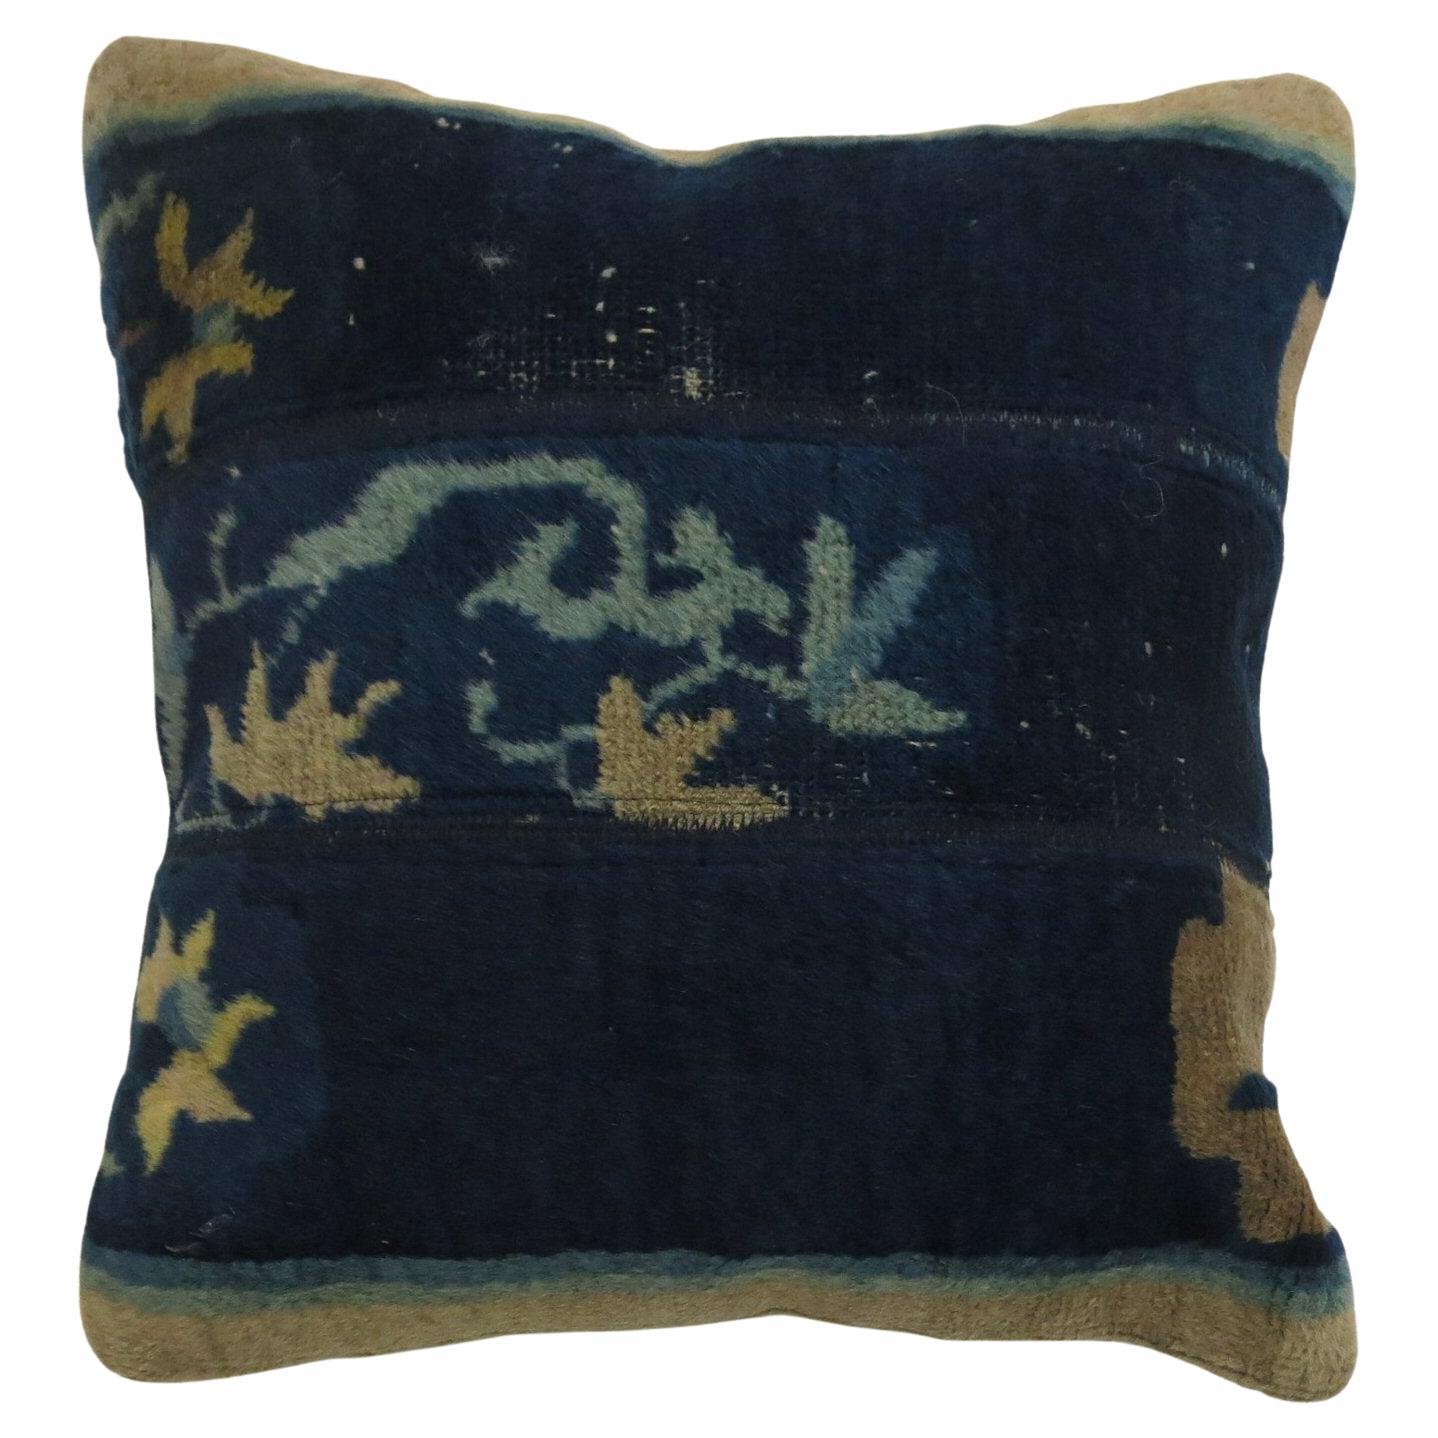 Navy Chinese Rug Pillow